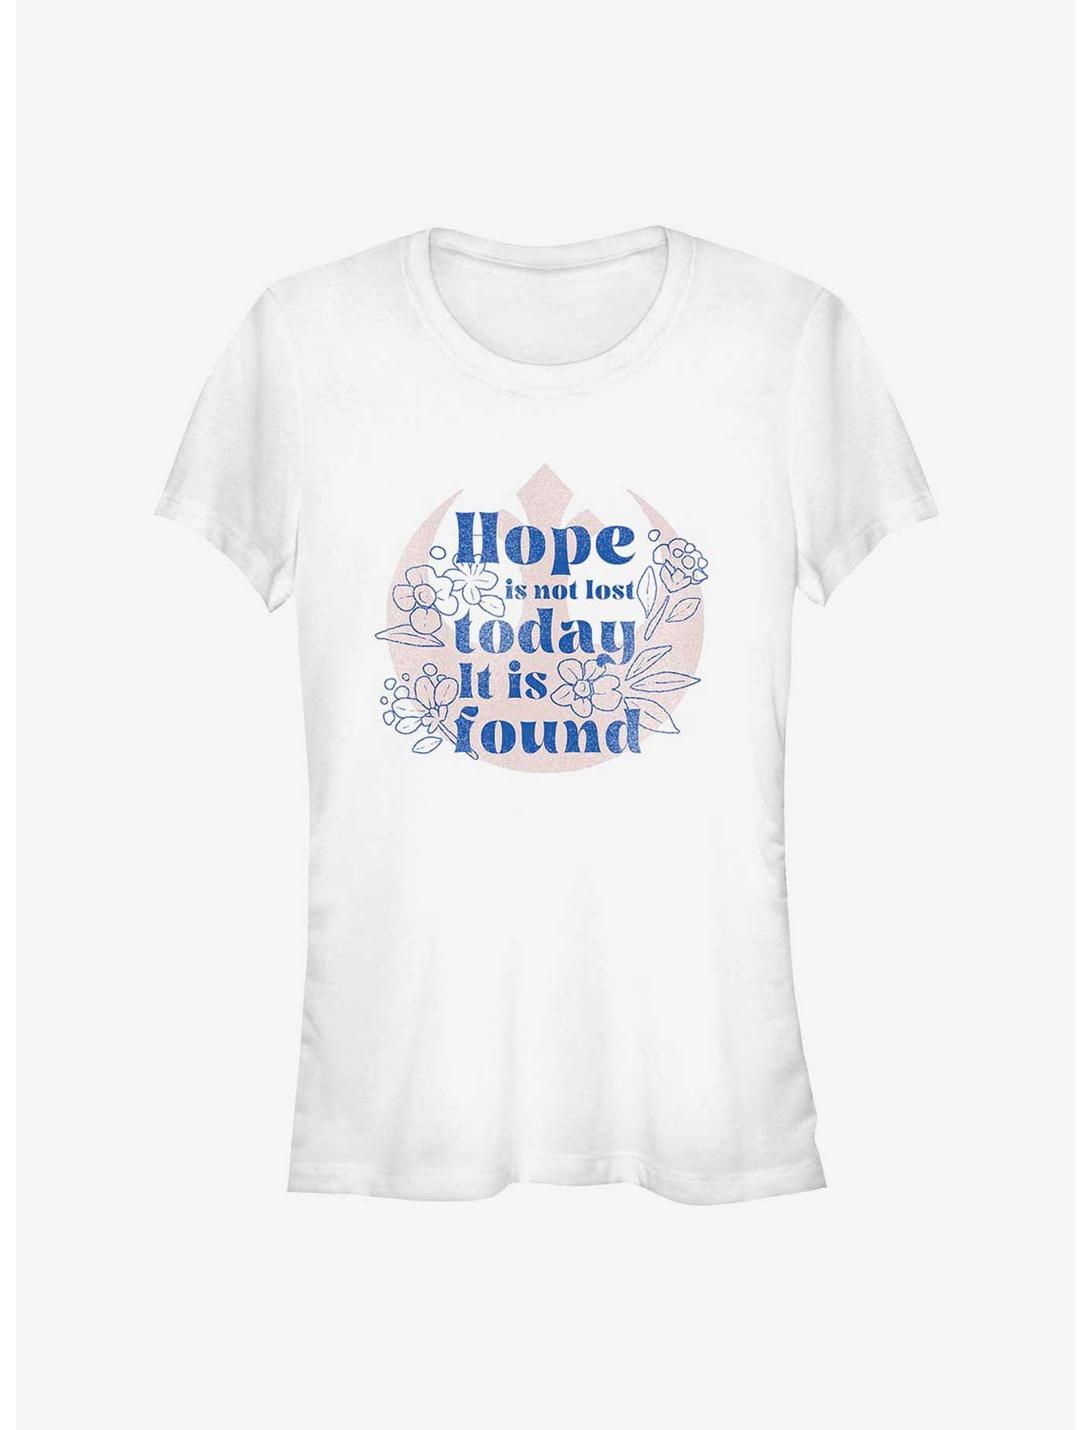 Star Wars Hope Is Not Lost Girls T-Shirt, WHITE, hi-res